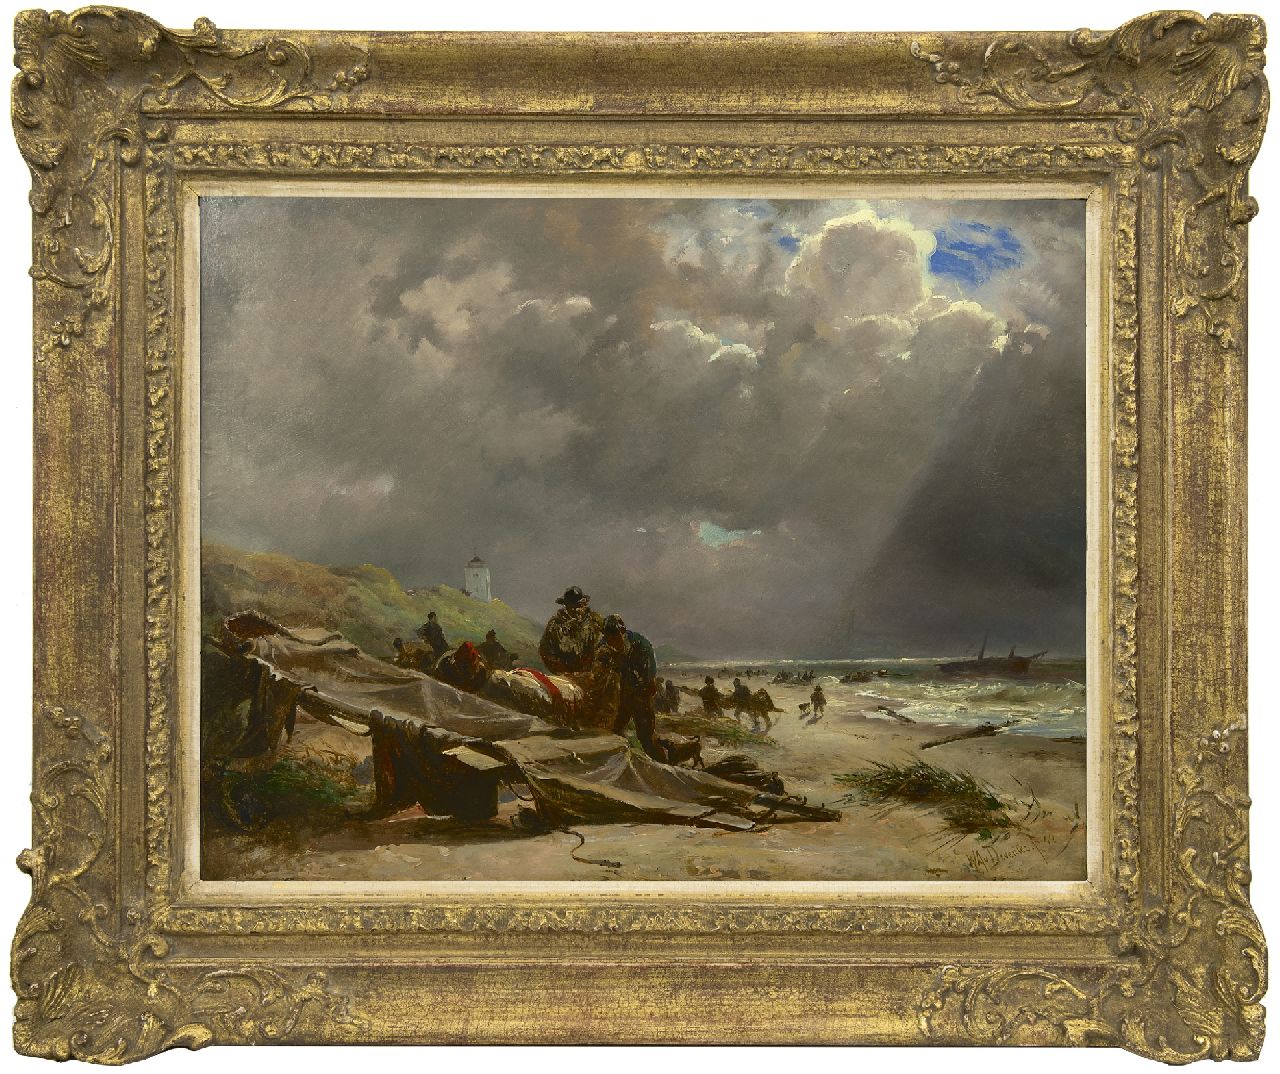 Deventer W.A. van | 'Willem' Anthonie van Deventer | Paintings offered for sale | Shipwreck on the beach of Katwijk, oil on paper laid down on painter's board 46.3 x 59.6 cm, signed l.r. and dated '44